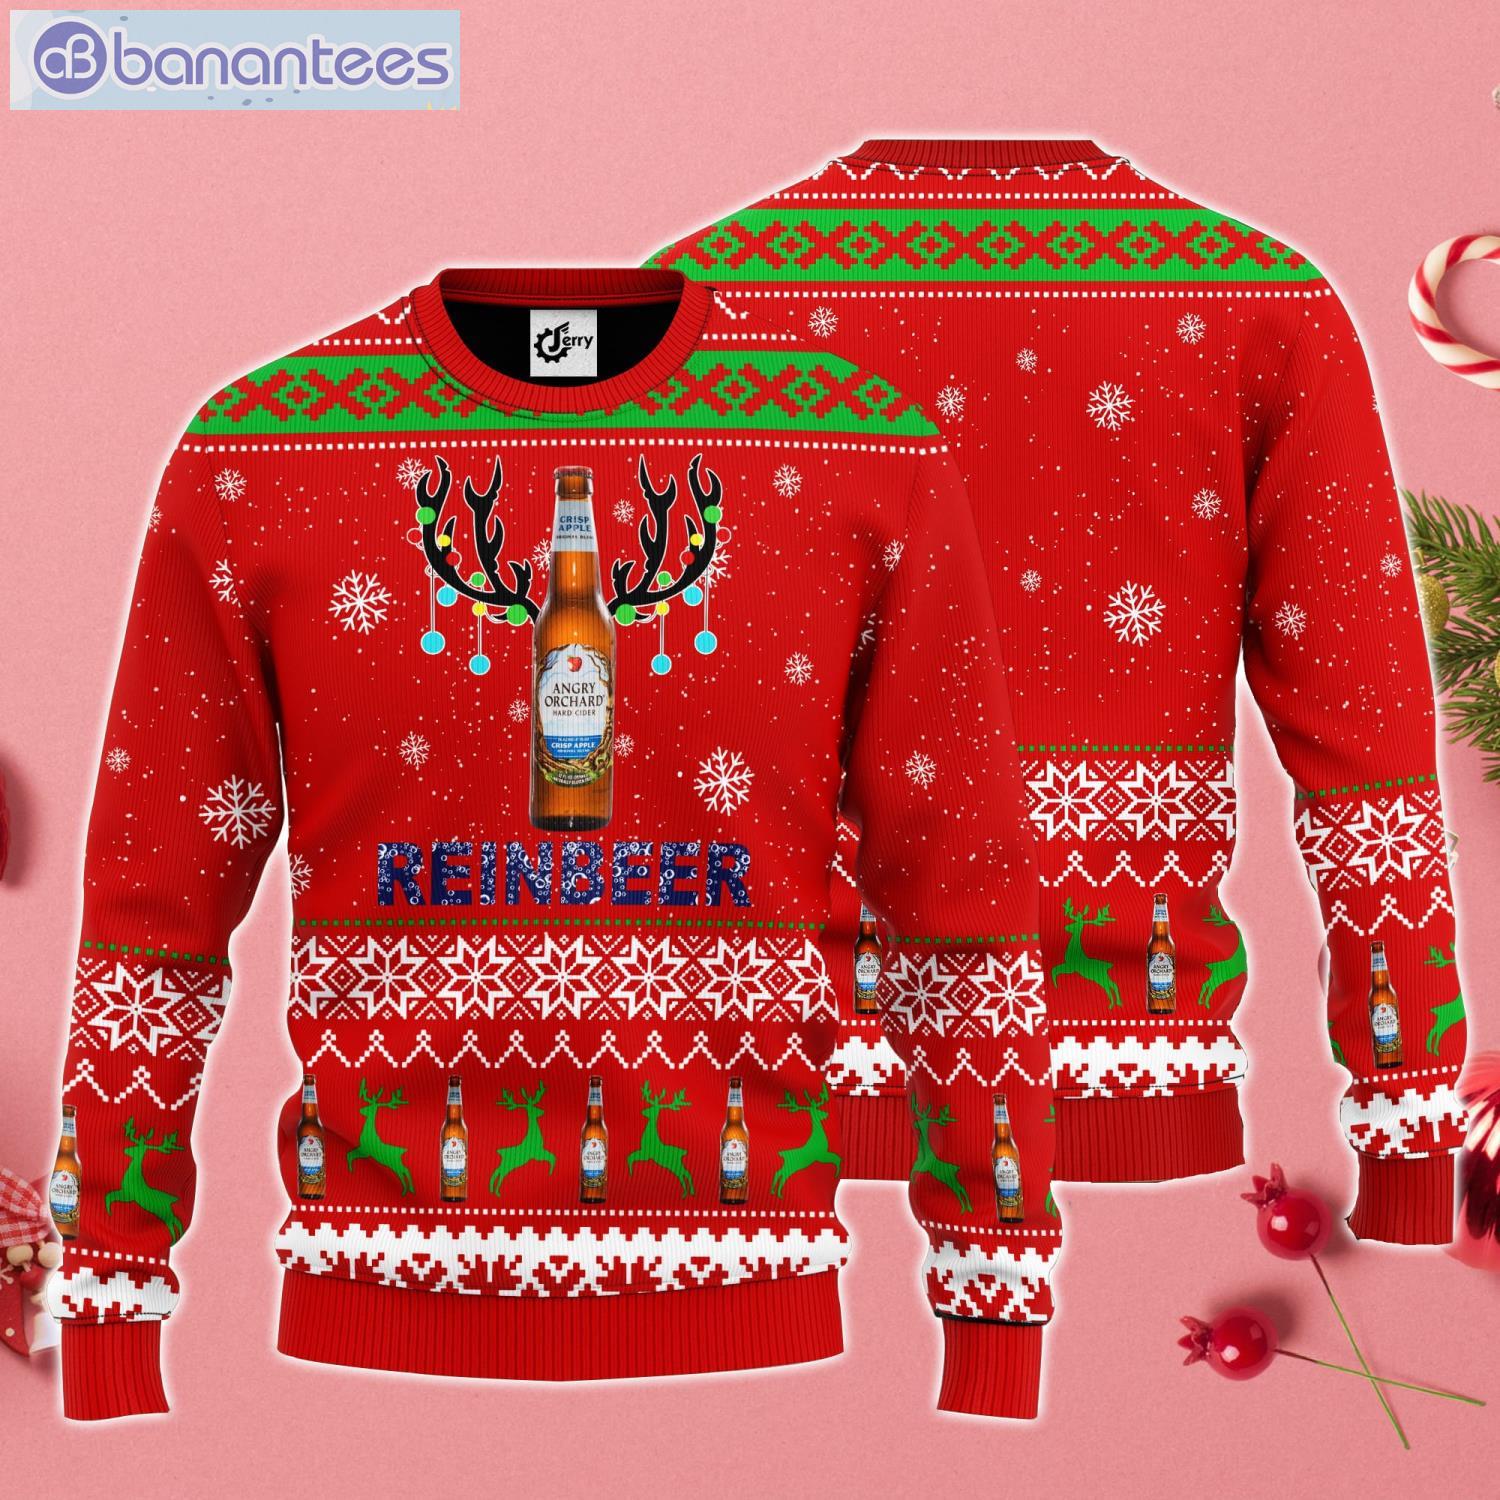 Angry Orchard Reinbeer Ugly Christmas Sweater Product Photo 1